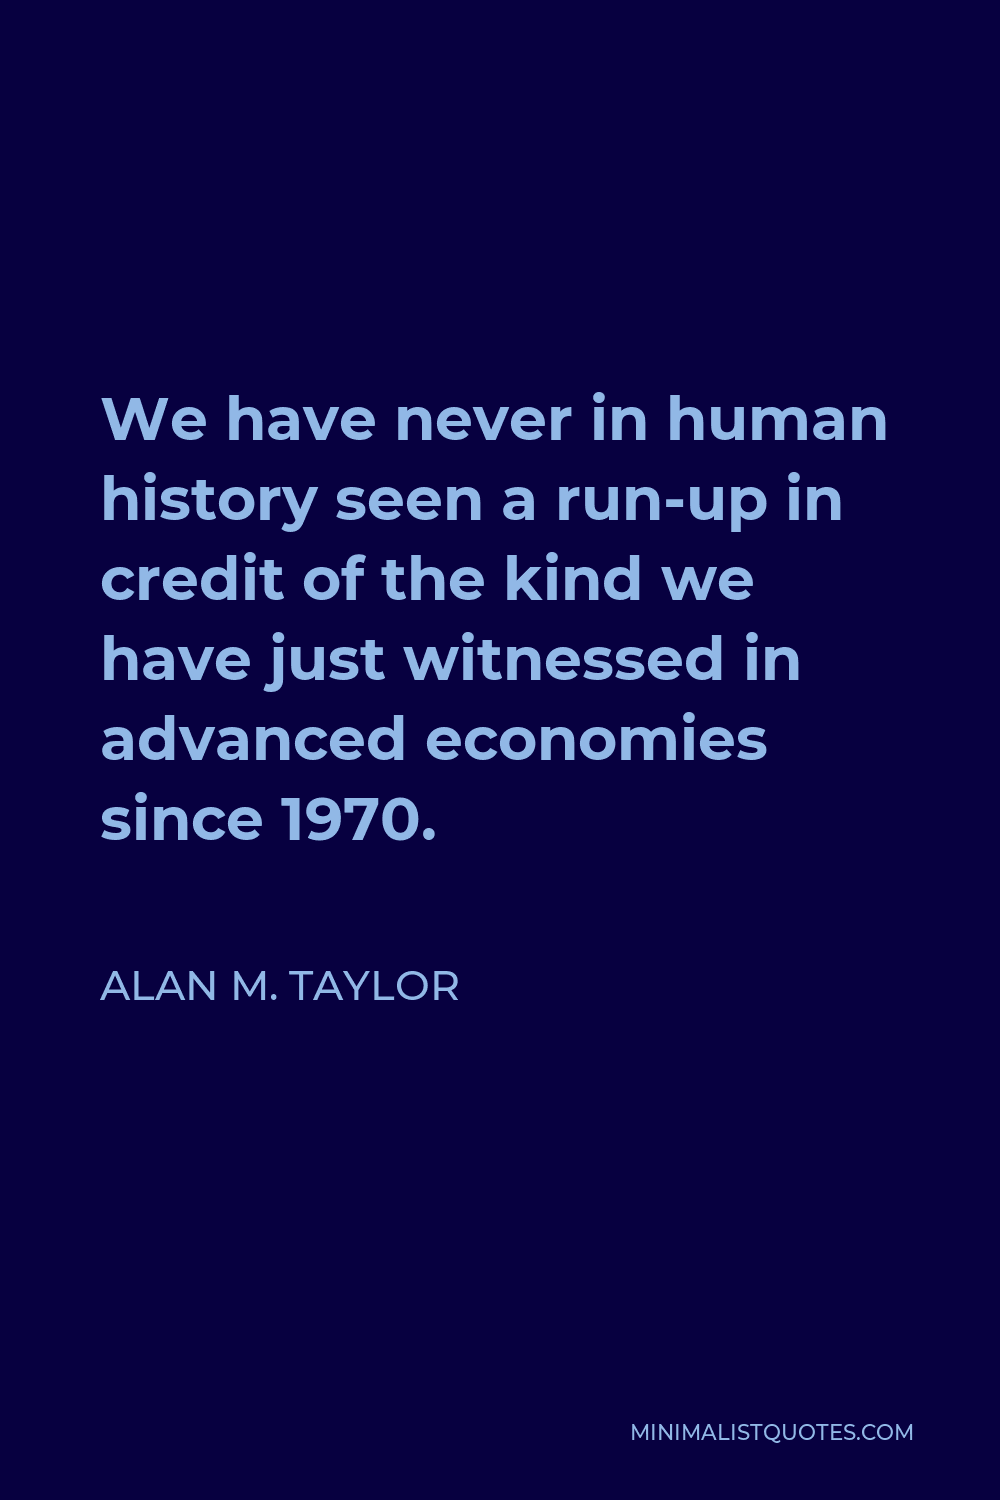 Alan M. Taylor Quote - We have never in human history seen a run-up in credit of the kind we have just witnessed in advanced economies since 1970.